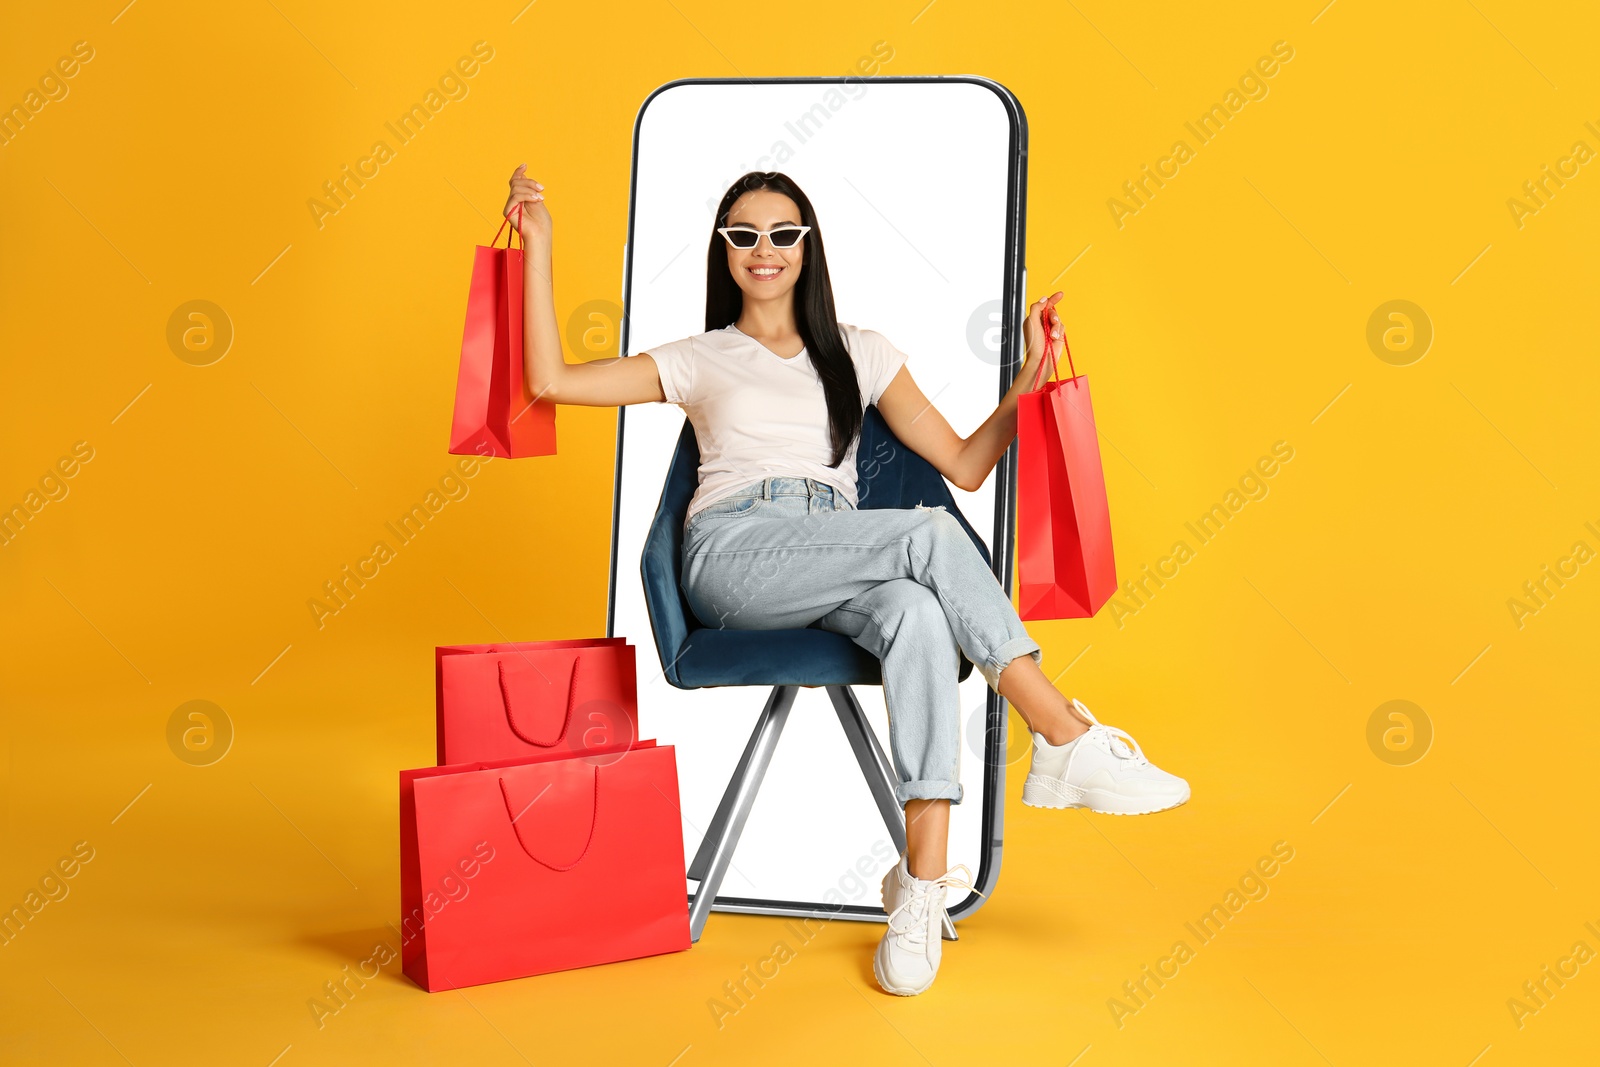 Image of Online shopping. Happy woman with paper bags sitting in armchair near smartphone on orange background